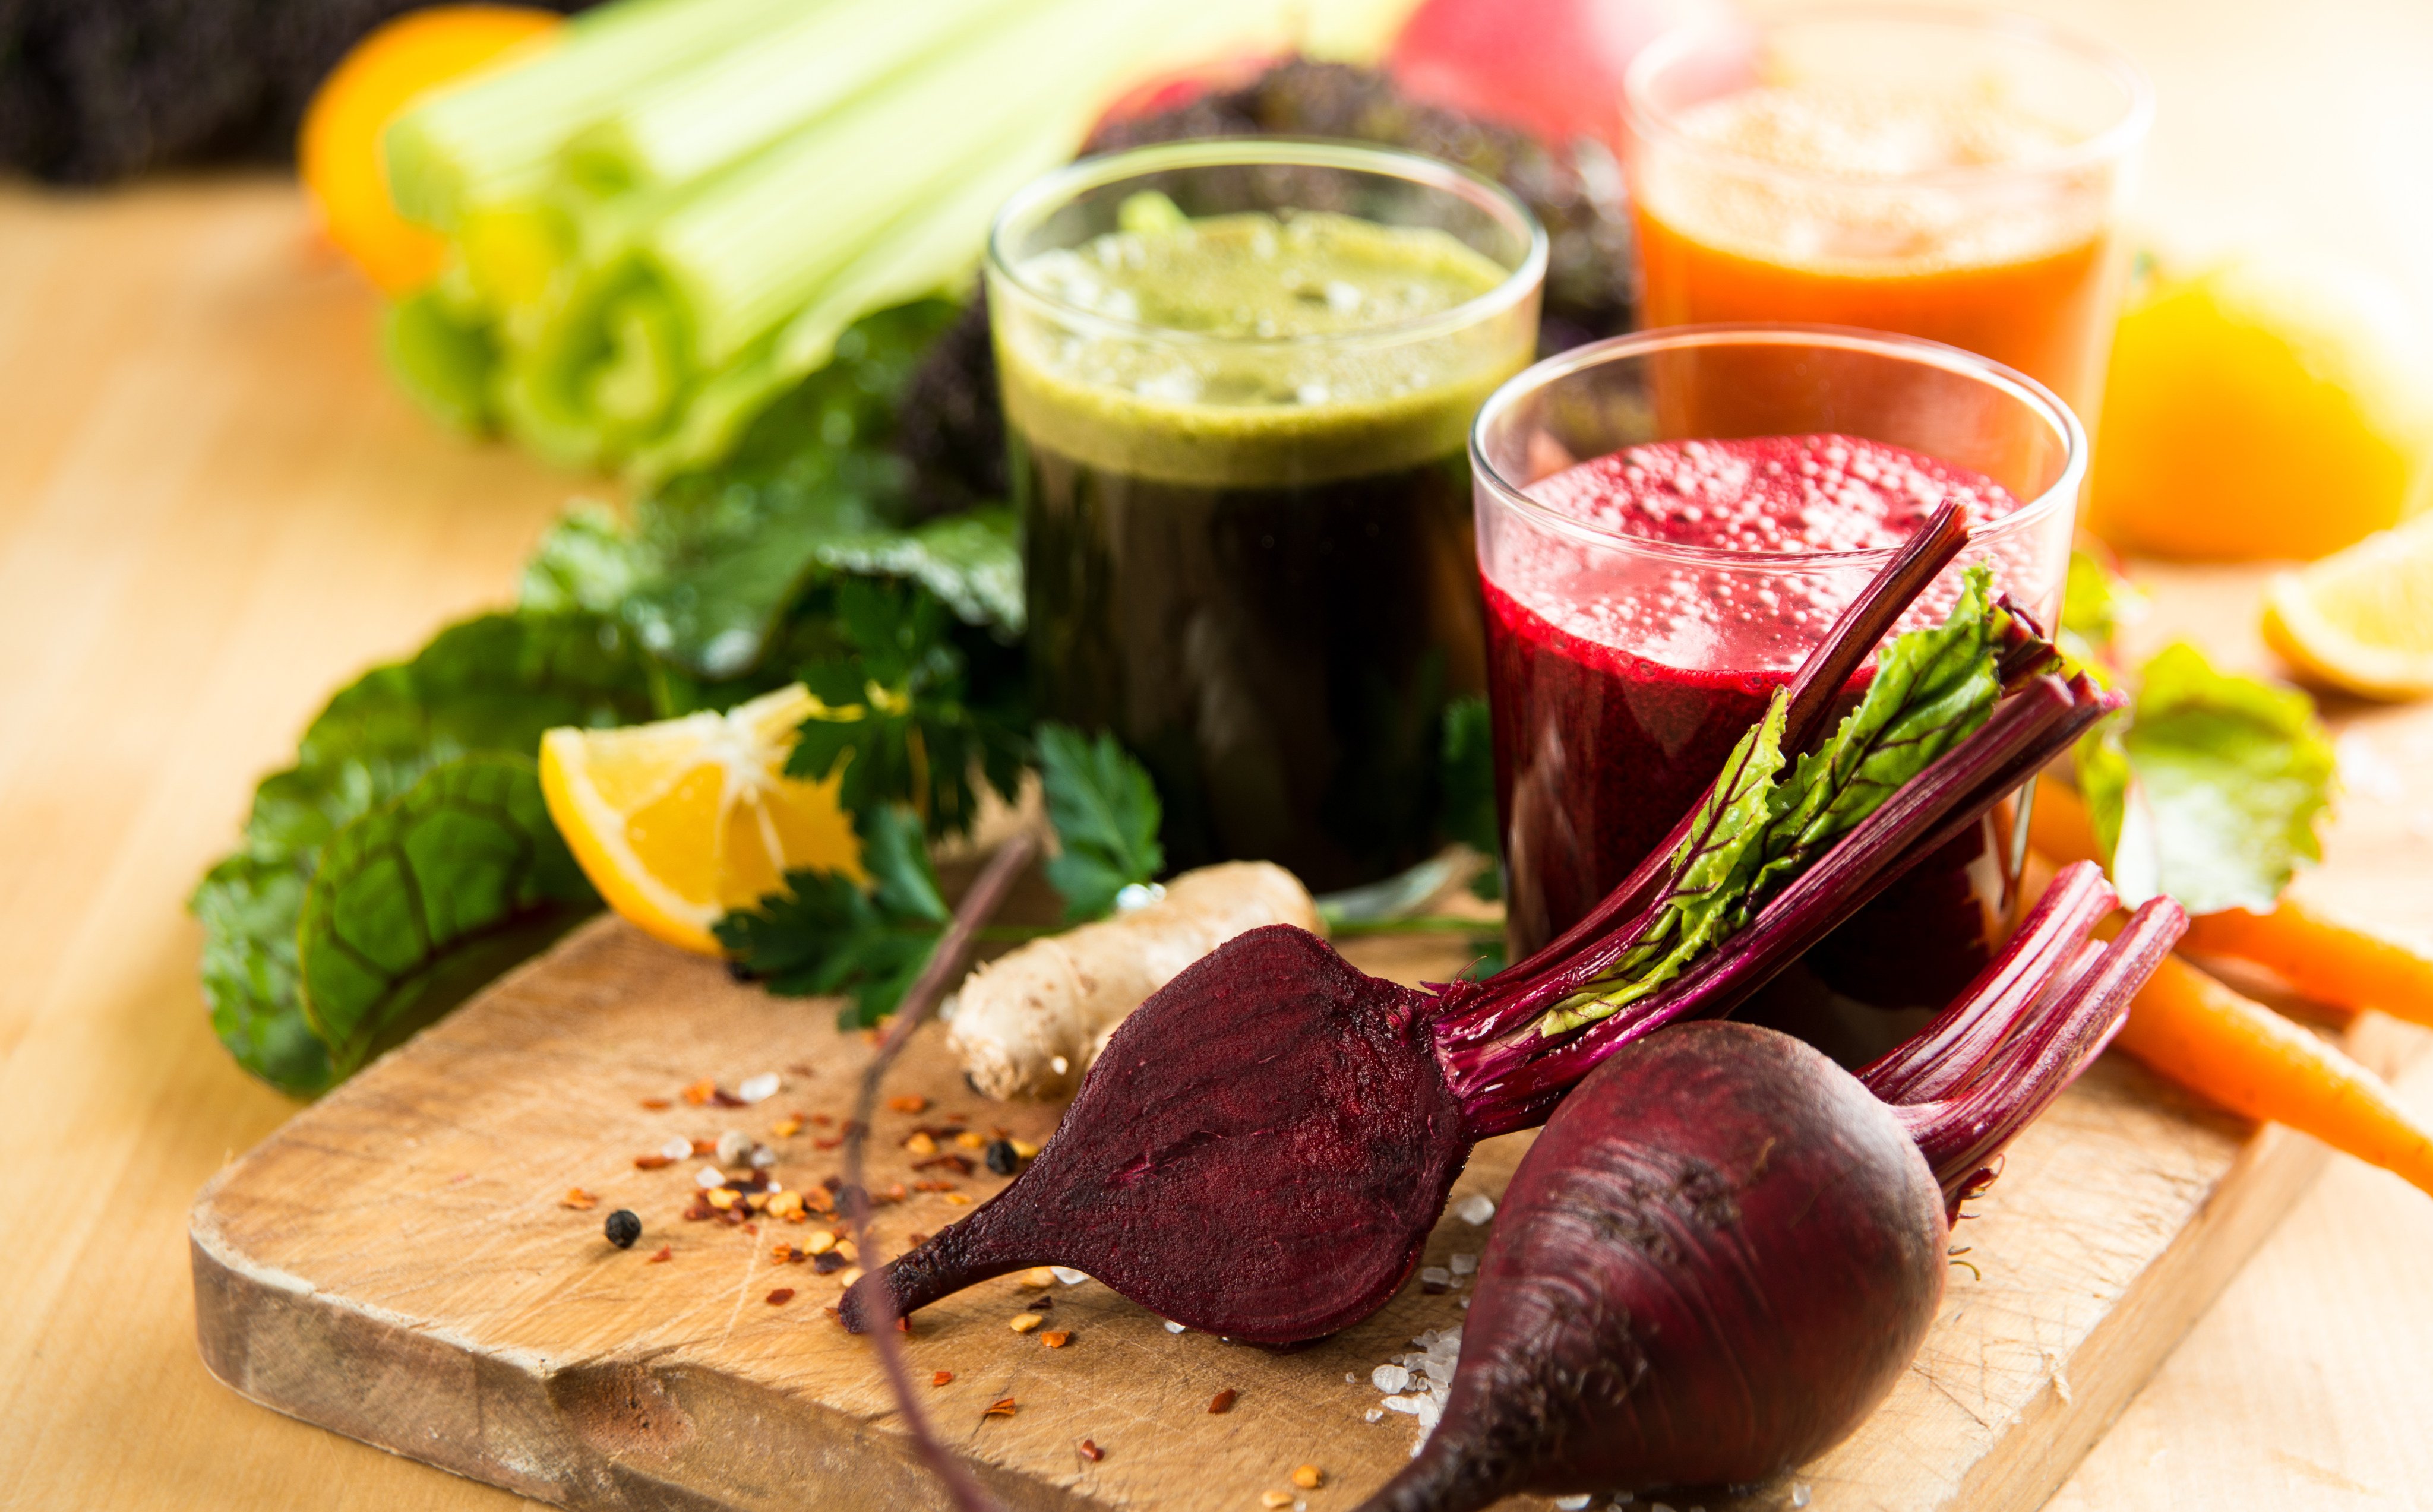 Juices provide the body with many vitamins, minerals and fibre and are easy to digest, lightening the bowels’ workload. Photo: Shutterstock